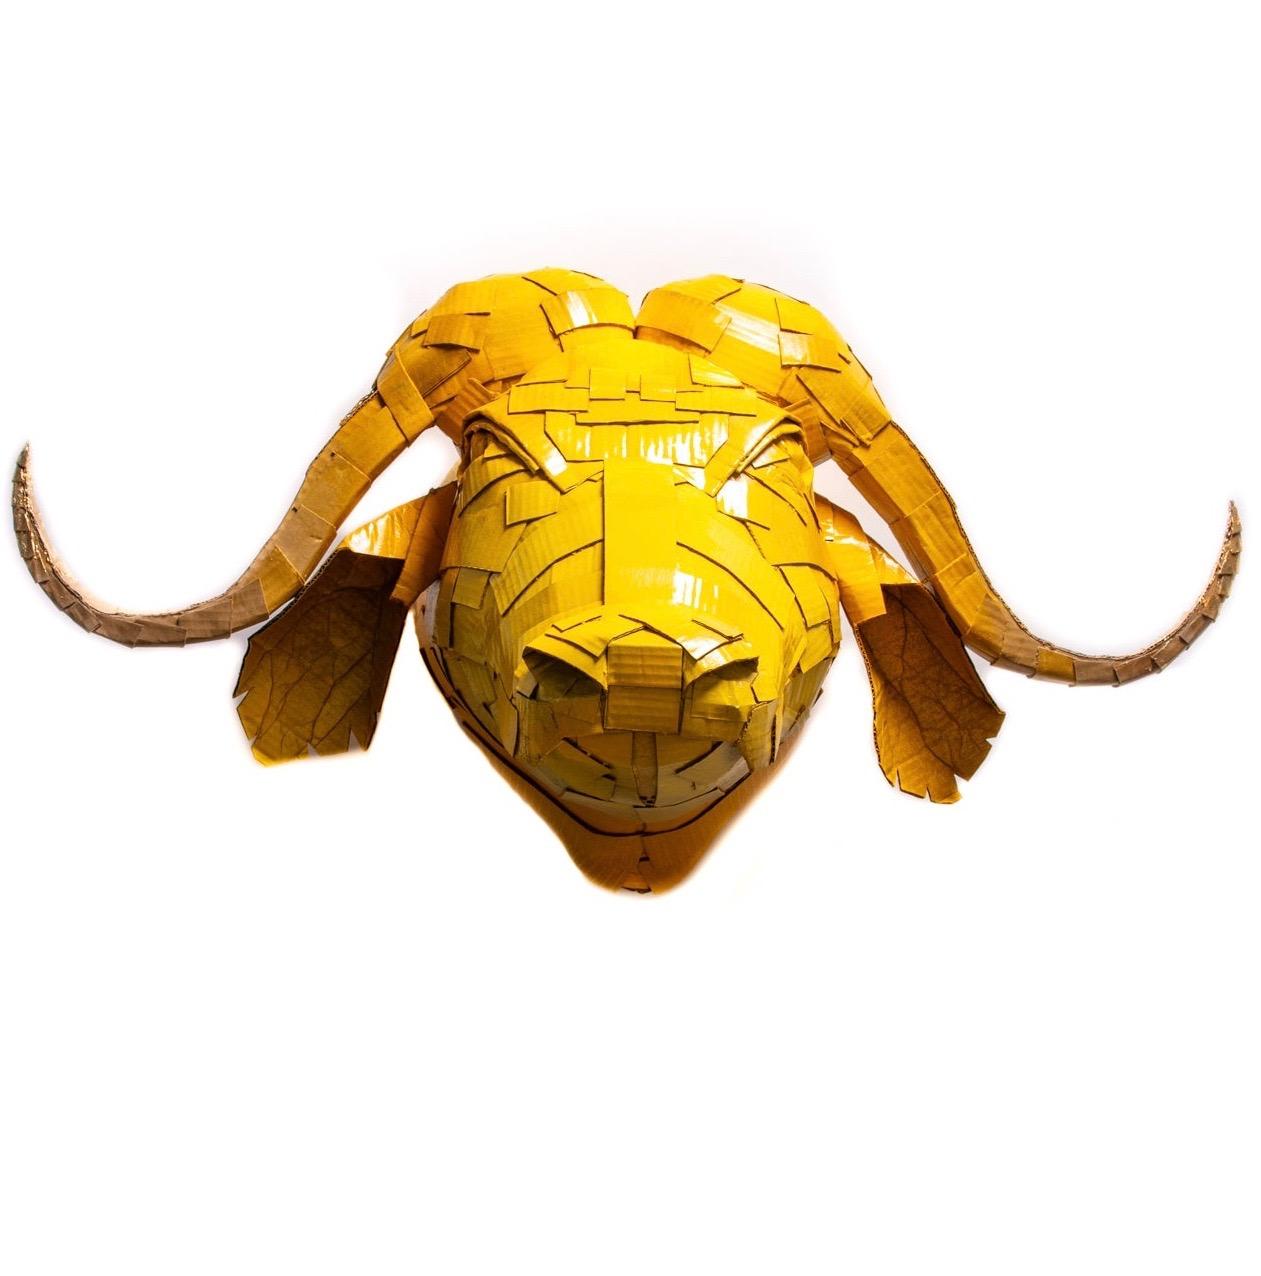 Buffalo #2 in Butterscotch Yellow with Gold Leaf Detail - Art by Justin King